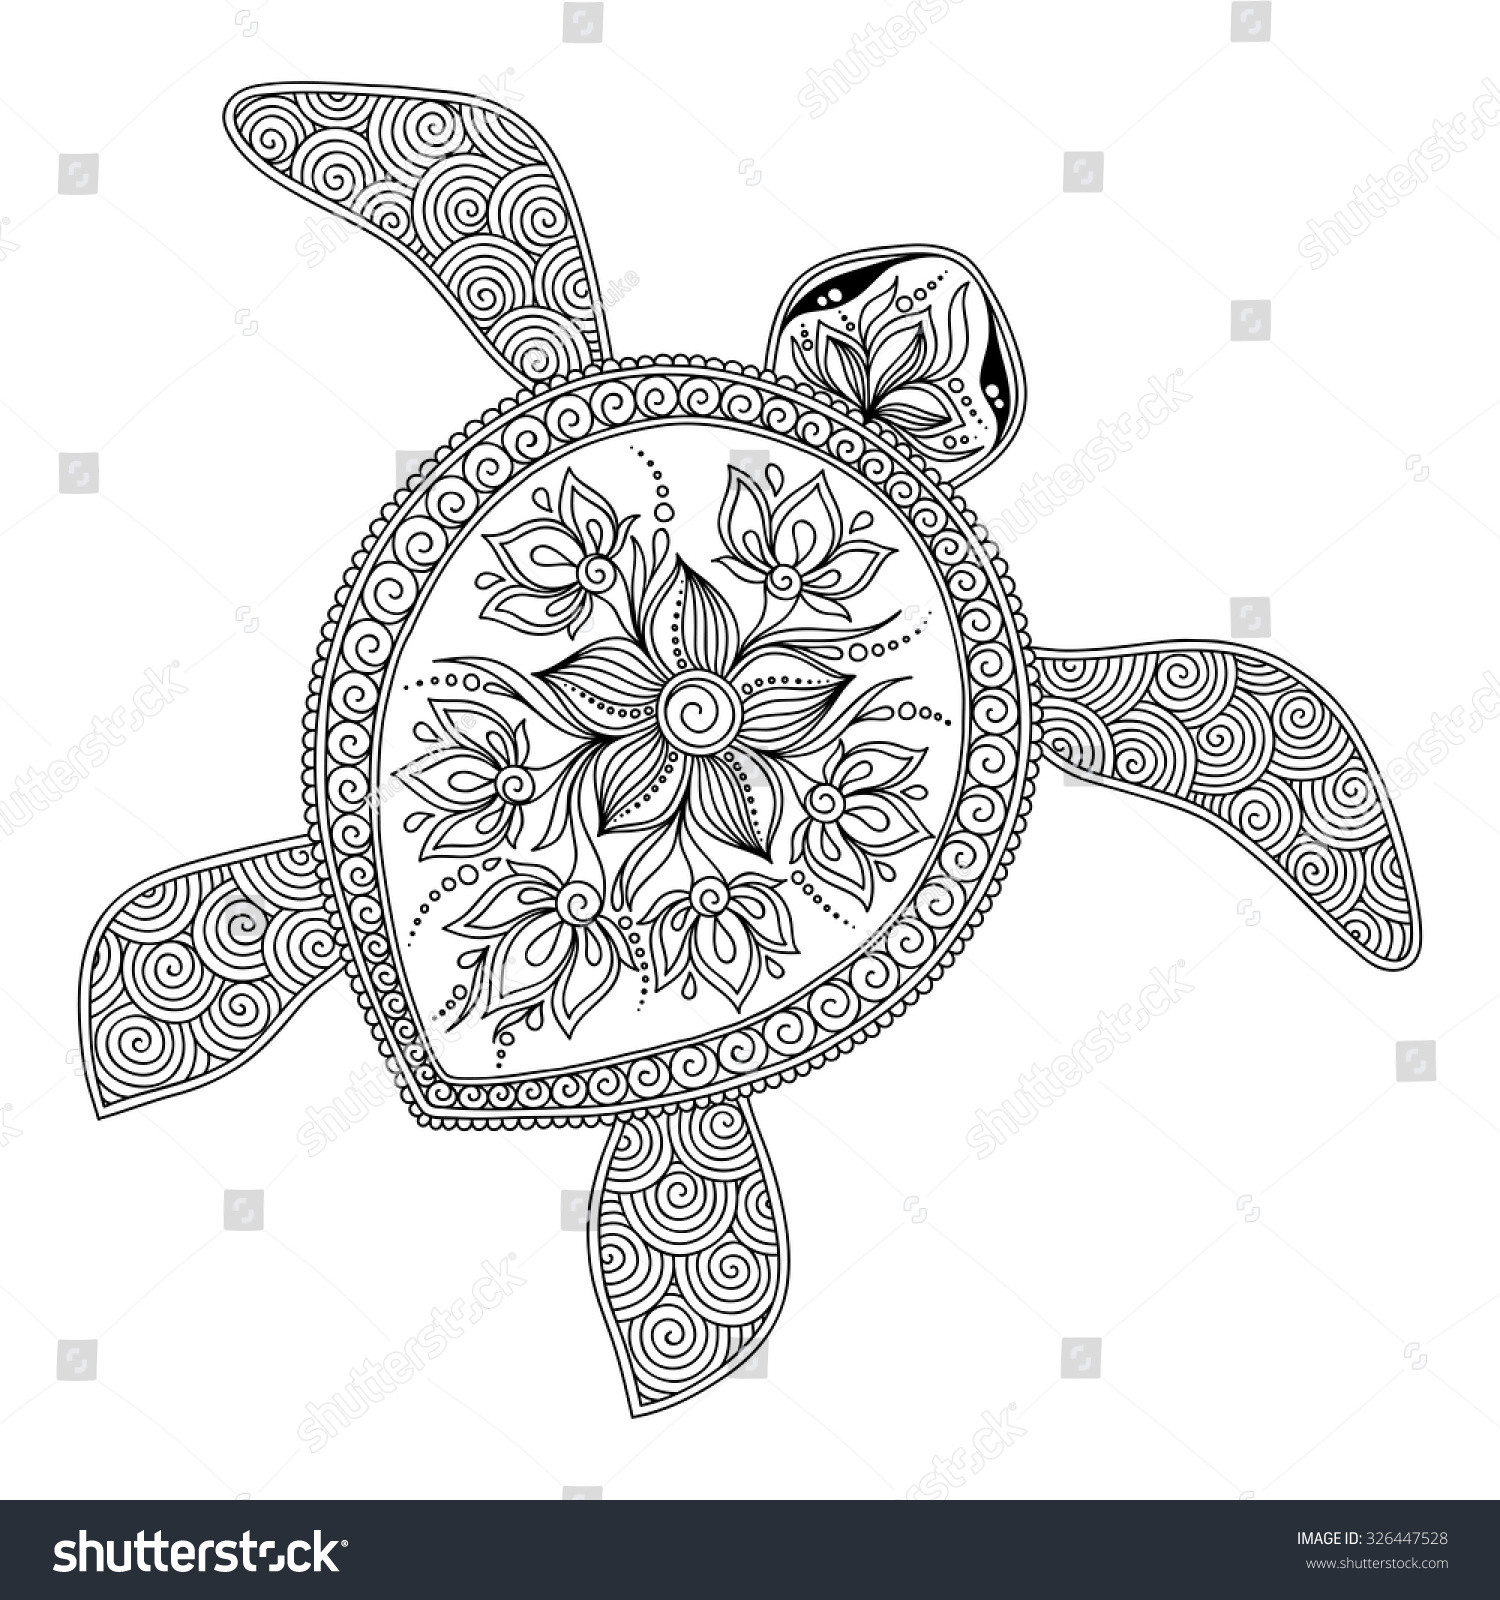 Sea Turtle Coloring Pages For Adults
 Pattern Coloring Book Coloring Book Pages Stock Vector